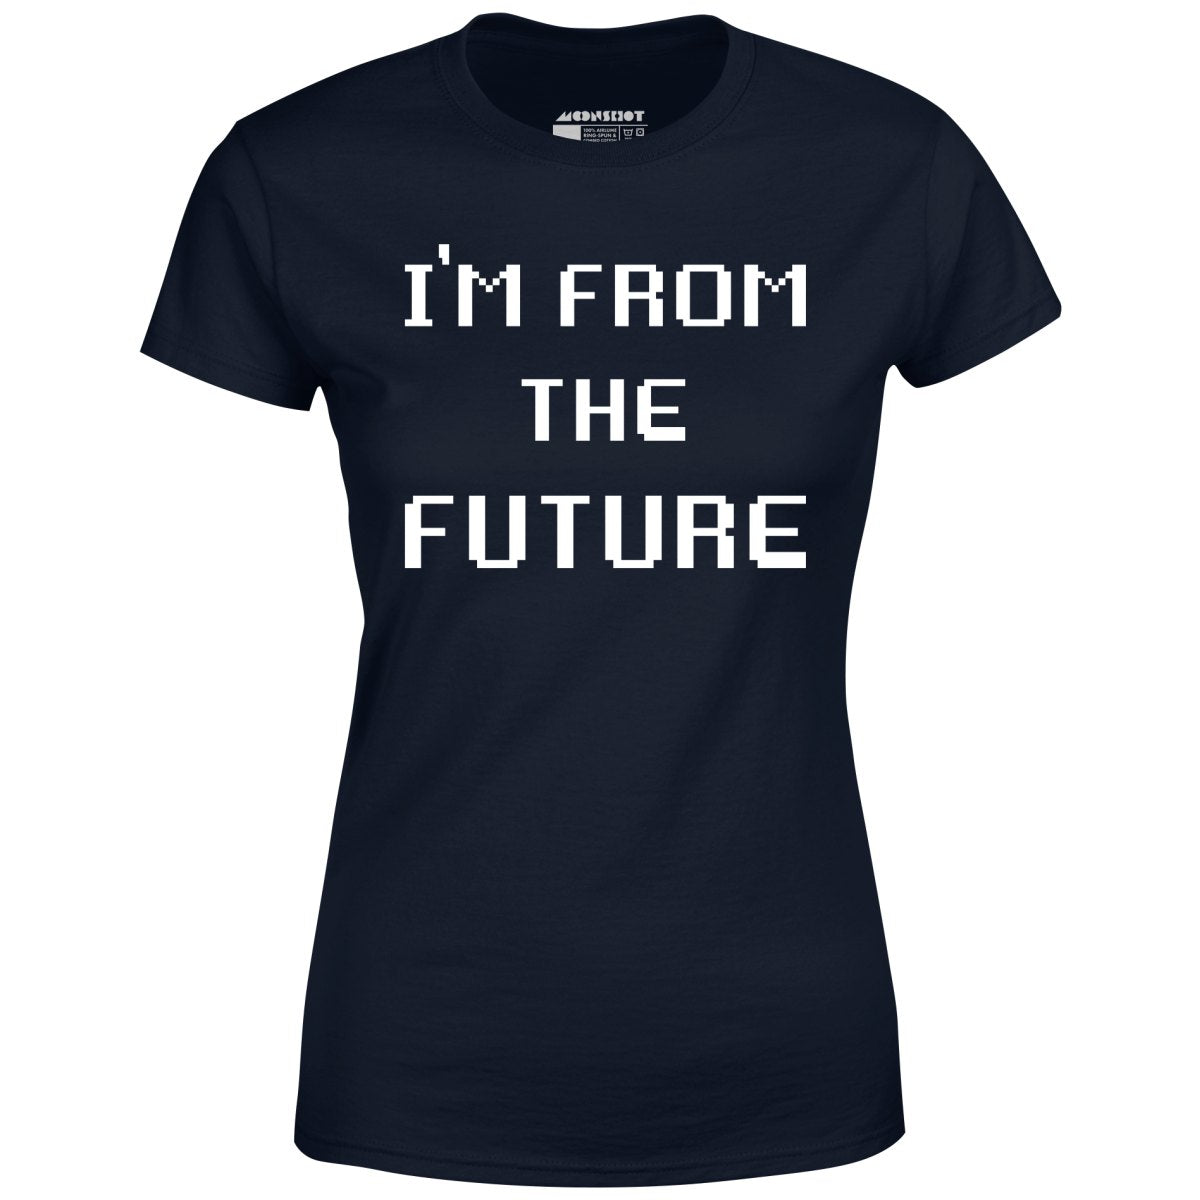 I'm From The Future - Women's T-Shirt